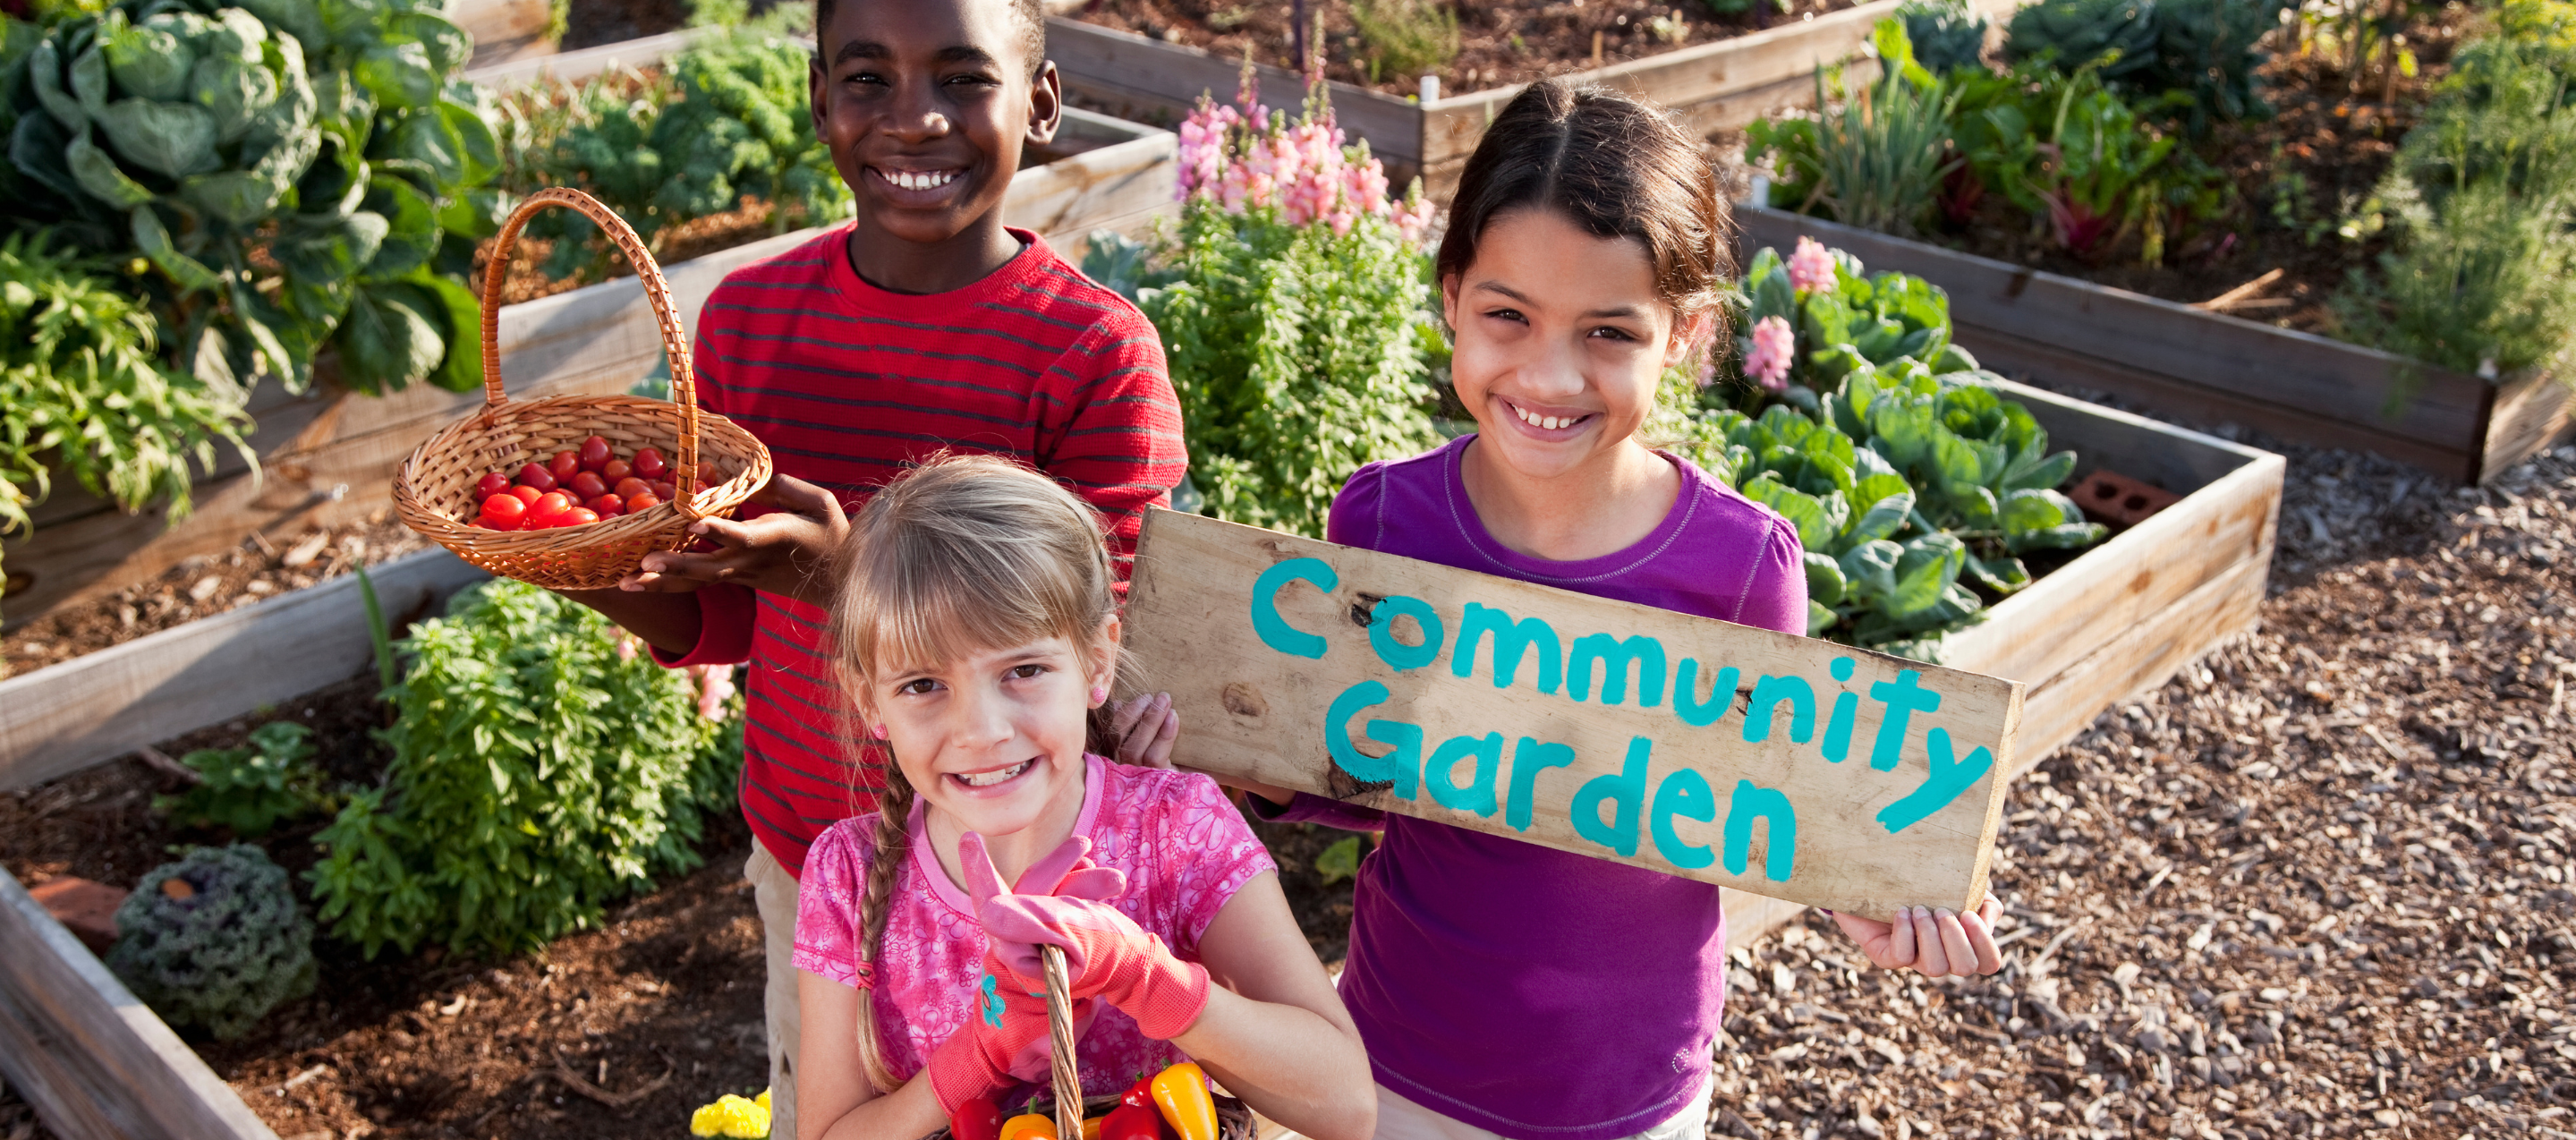 A boy and a girl in a vegetable plot holding baskets of vegetables and smiling. Another girl is with them and is holding a sign that says 'community garden'.